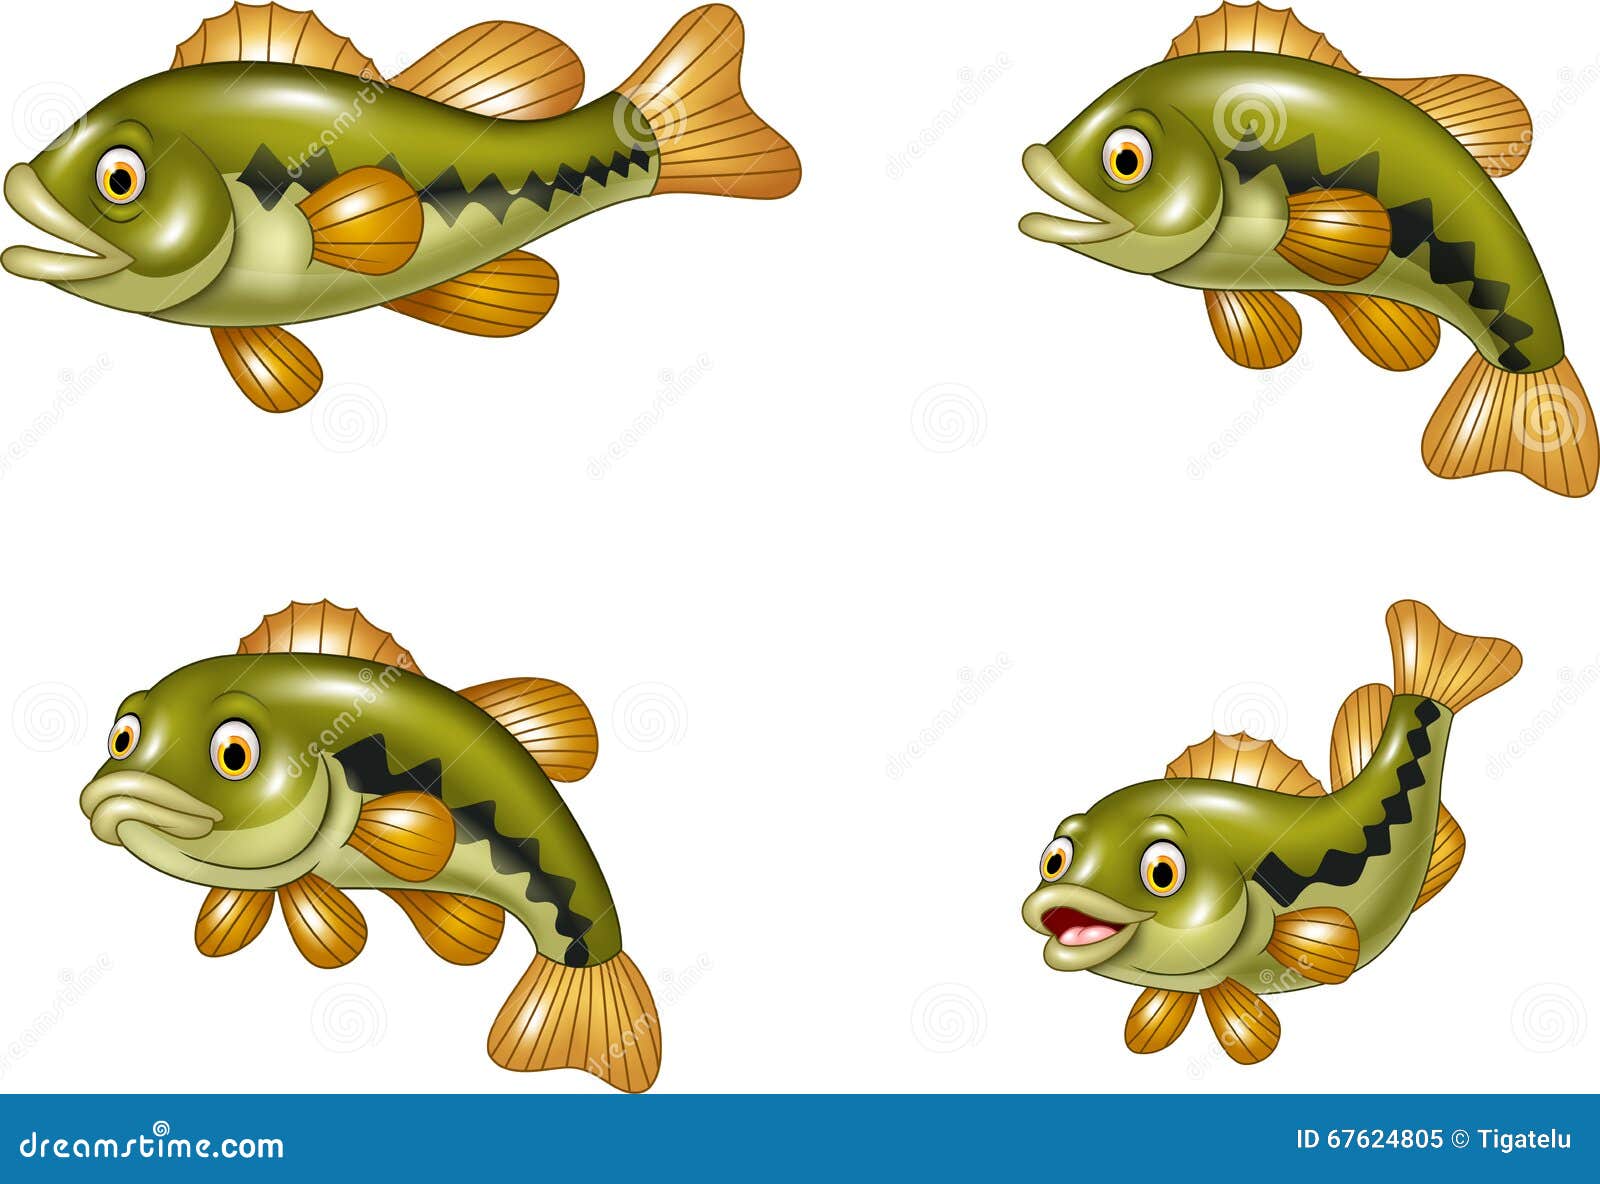 https://thumbs.dreamstime.com/z/cartoon-funny-bass-fish-collection-white-background-illustration-67624805.jpg